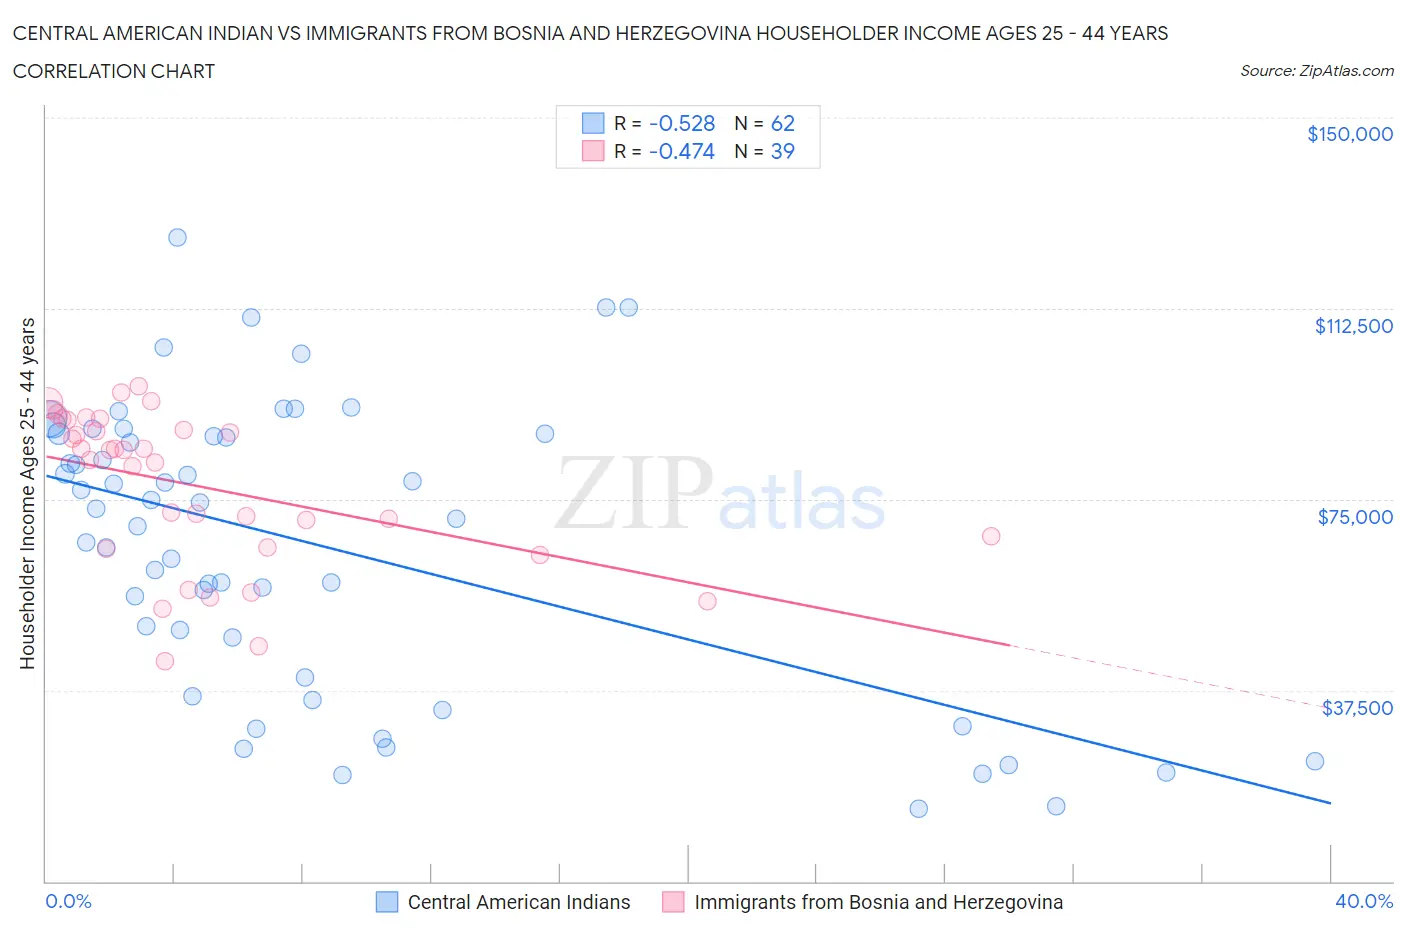 Central American Indian vs Immigrants from Bosnia and Herzegovina Householder Income Ages 25 - 44 years